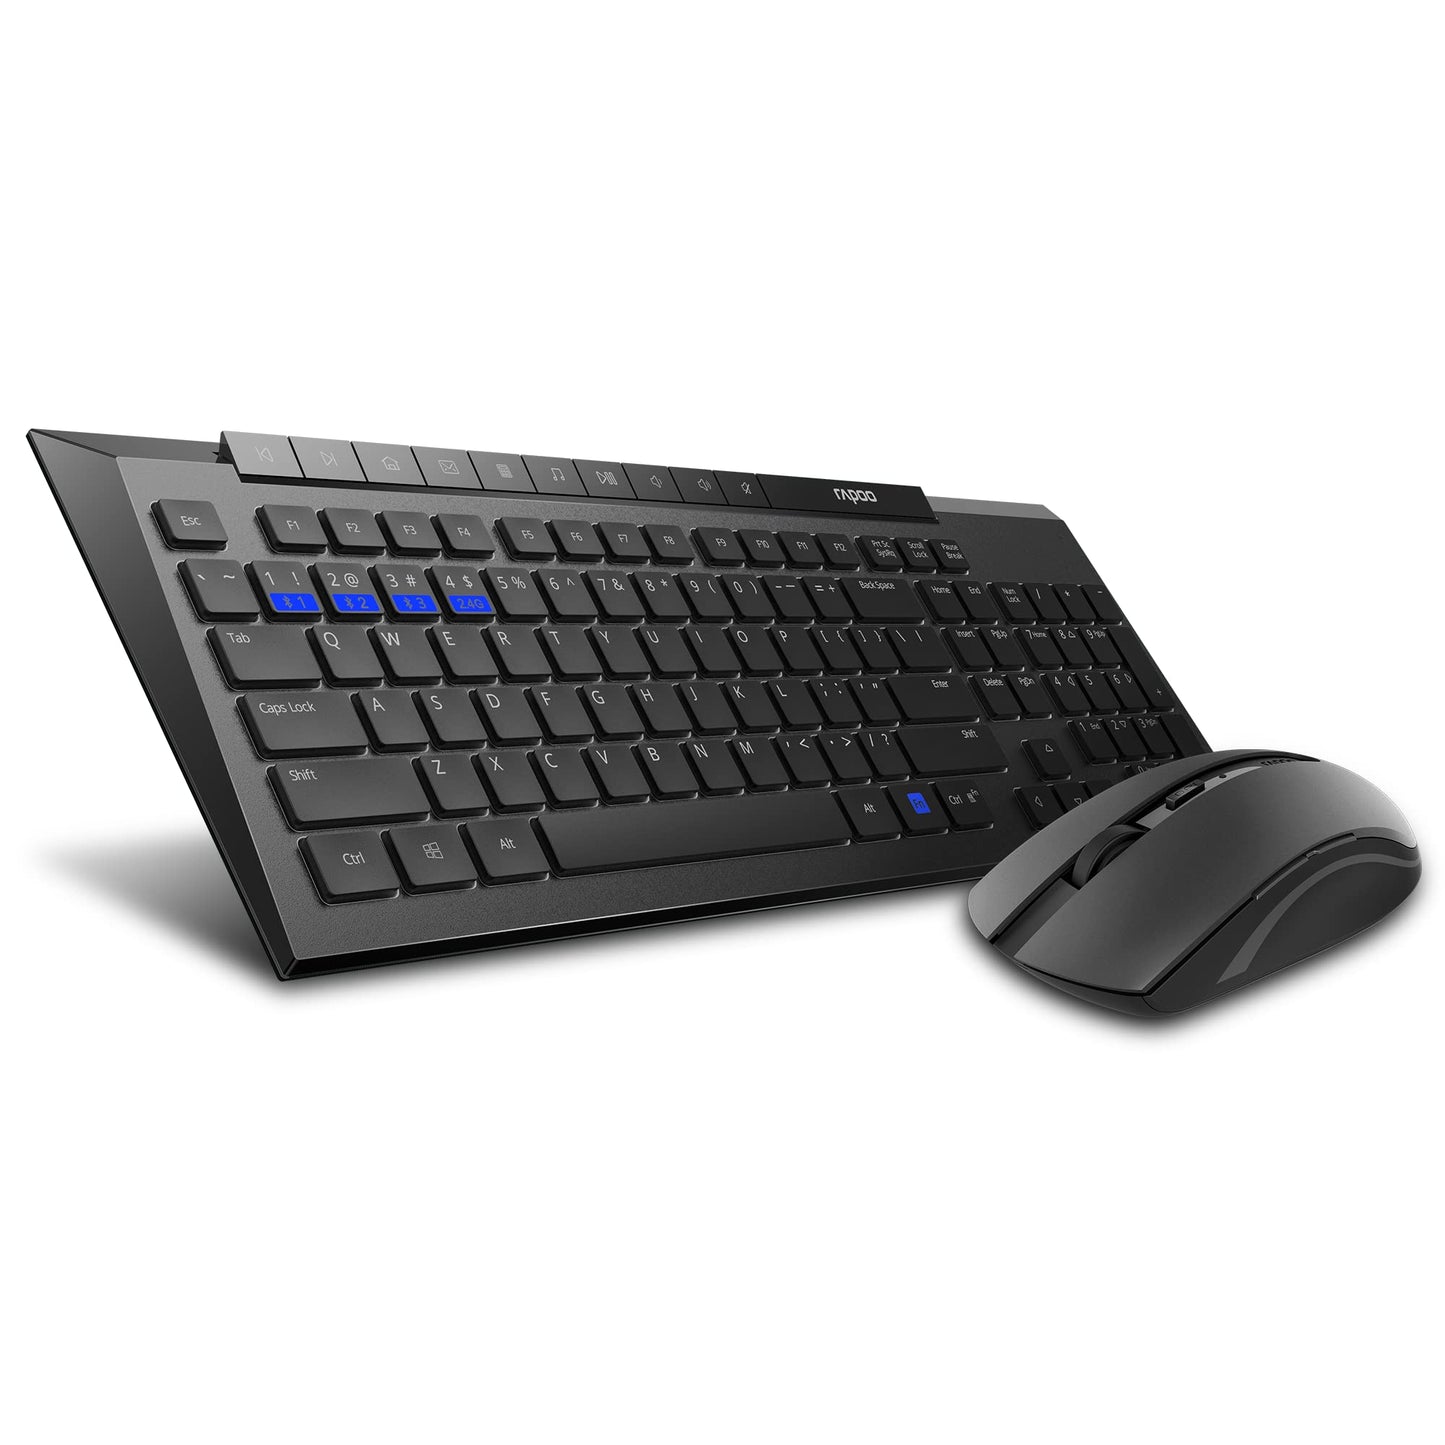 RAPOO 8210M Wireless Keyboard and Mouse Combo, Multi-mode connectivity connect up to 3 Devices simultaneously, BT5.0, BT 3.0 and 2.4 G | Adjustable DPI Optical Mouse English/Arabic Layout (White) - CaveHubs